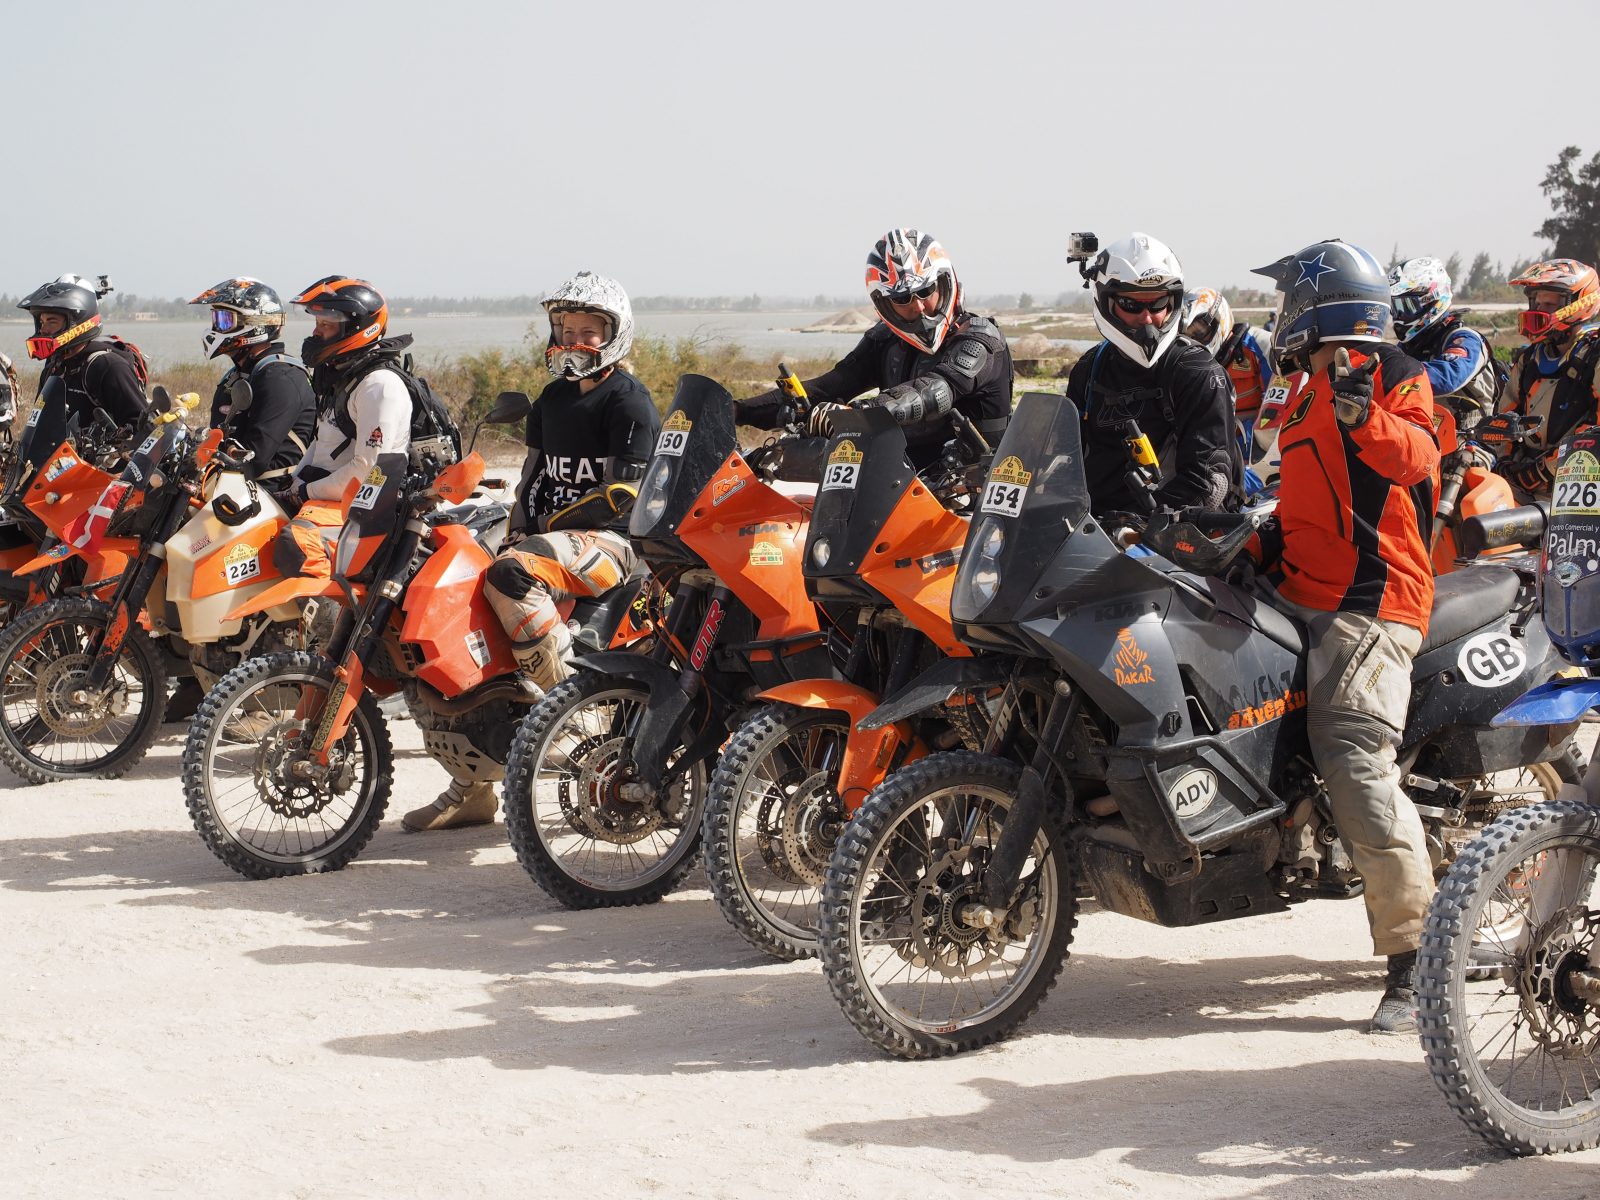 Motos at the tarting line in the Intercontinental Rally